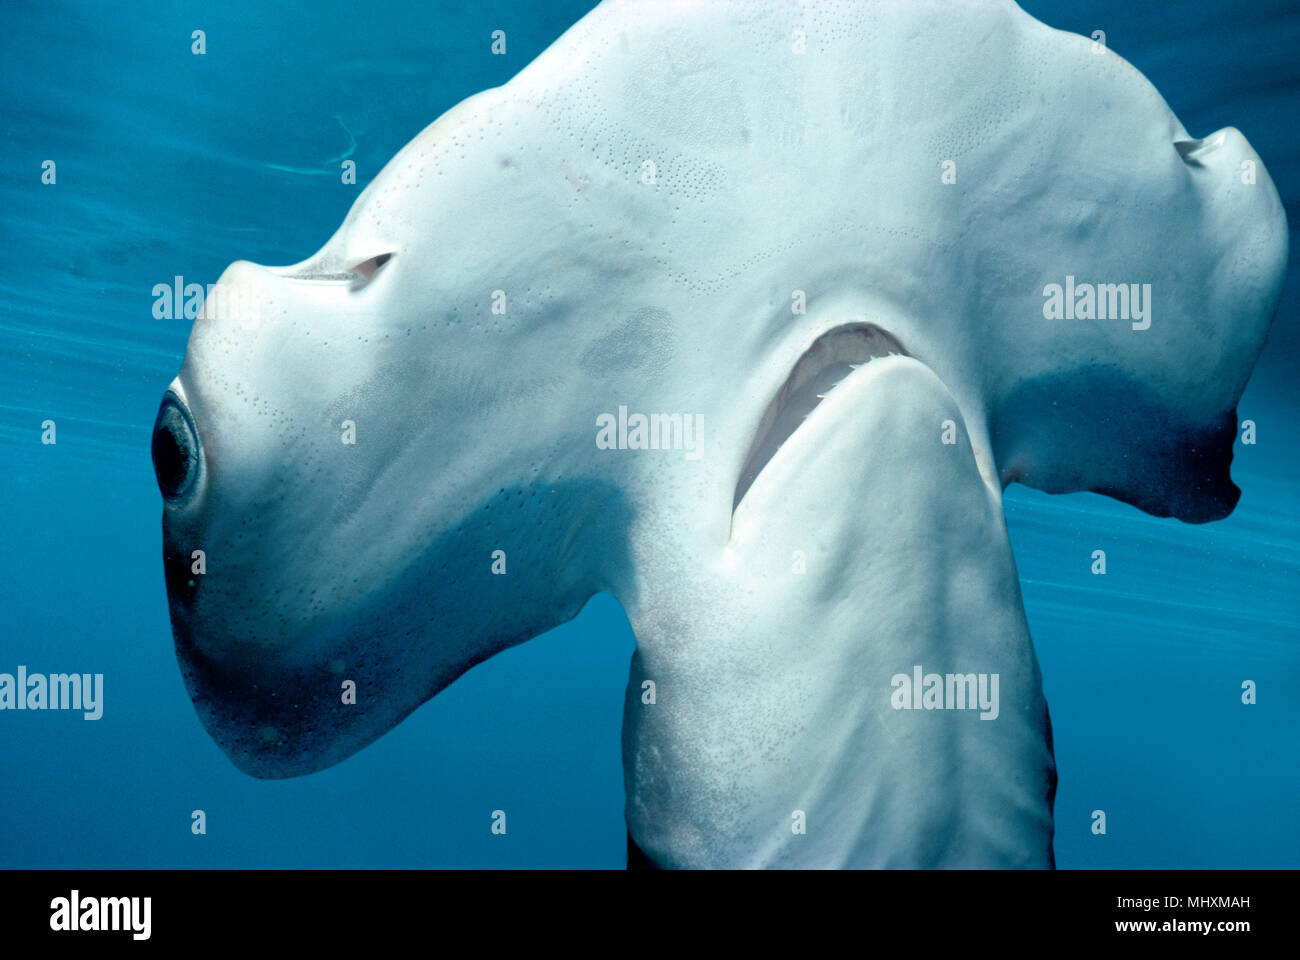 Head and mouth of Juvenile Scalloped Hammerhead Shark (Sphyrna Lewini), Kane'ohe Bay, Hawaii - Pacific Ocean.   This image has been digitally altered  Stock Photo